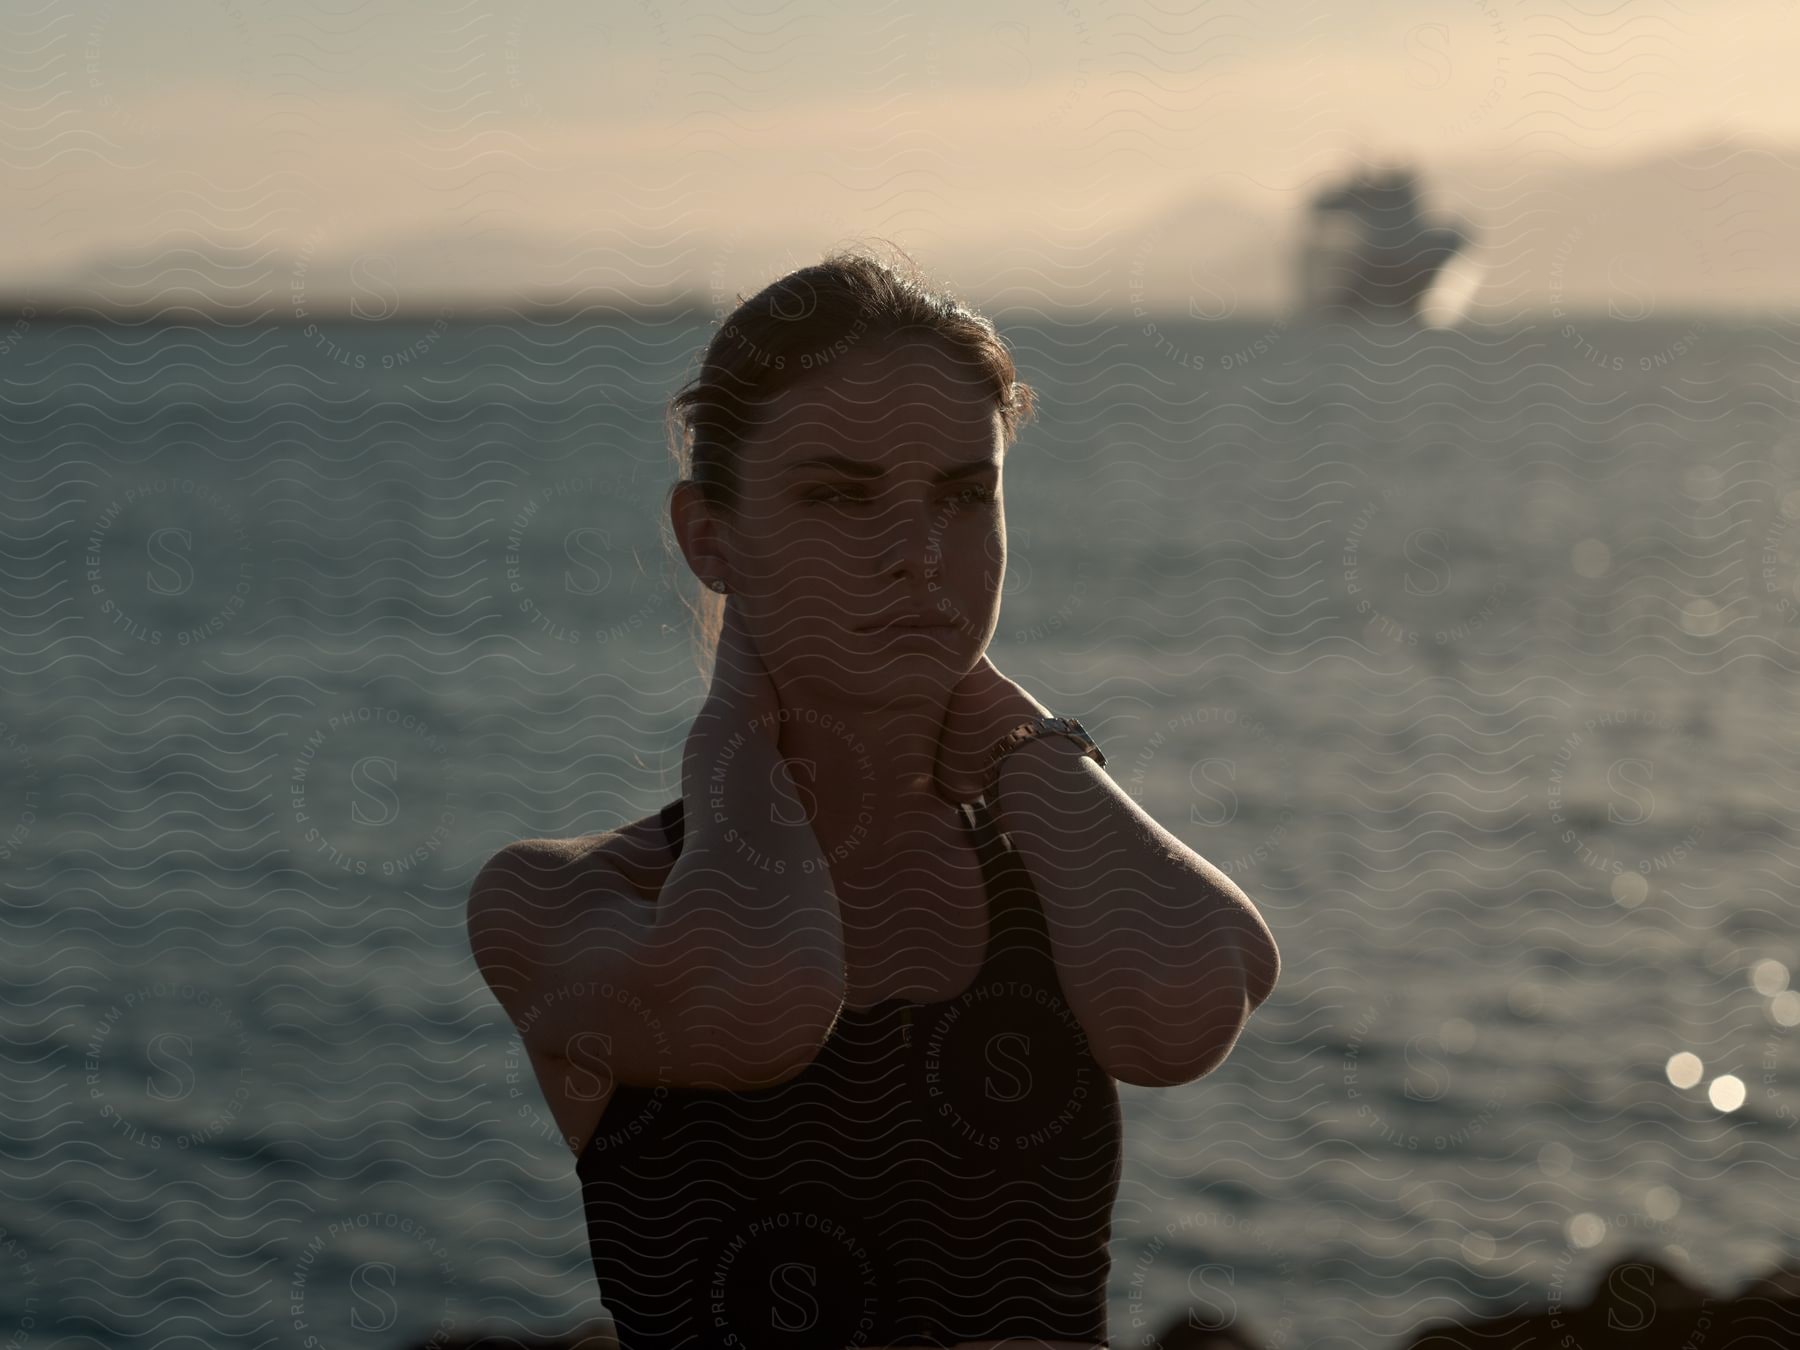 a woman wearing a black top and a wristwatch doing stretches by the sea, with a ship in the background at sunset.